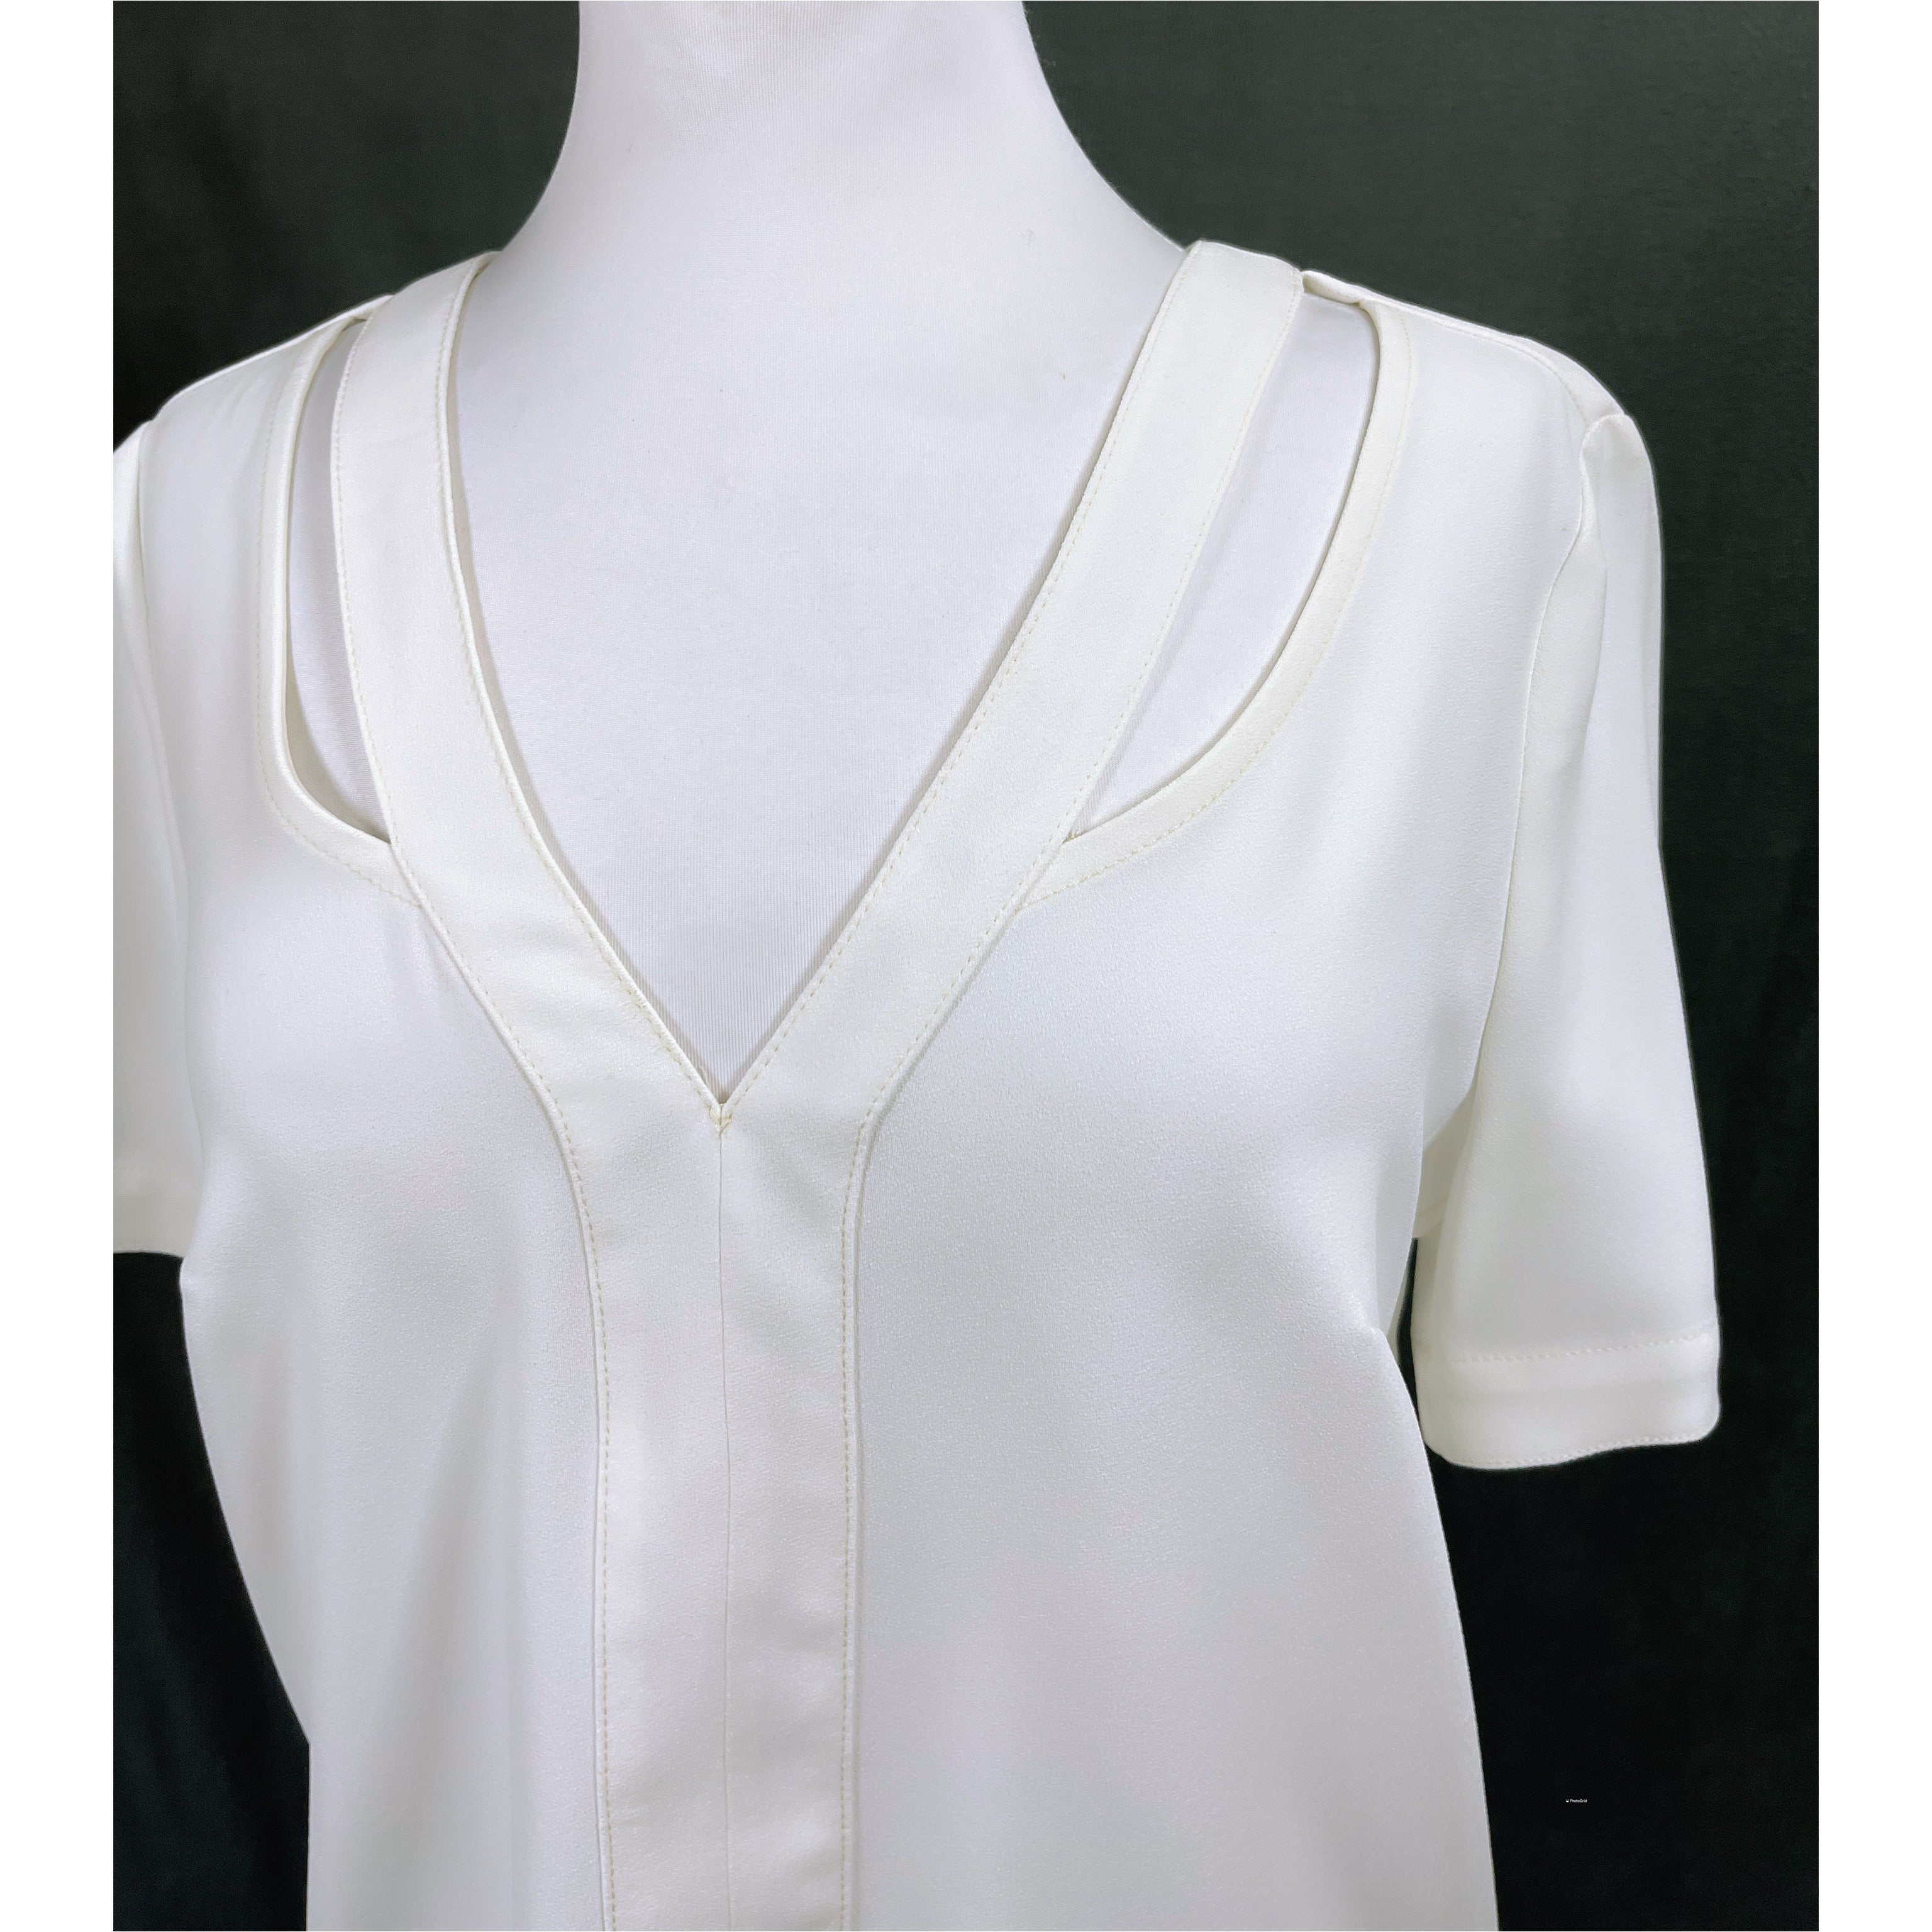 Trina Turk cream blouse, size S, NEW WITH TAGS!